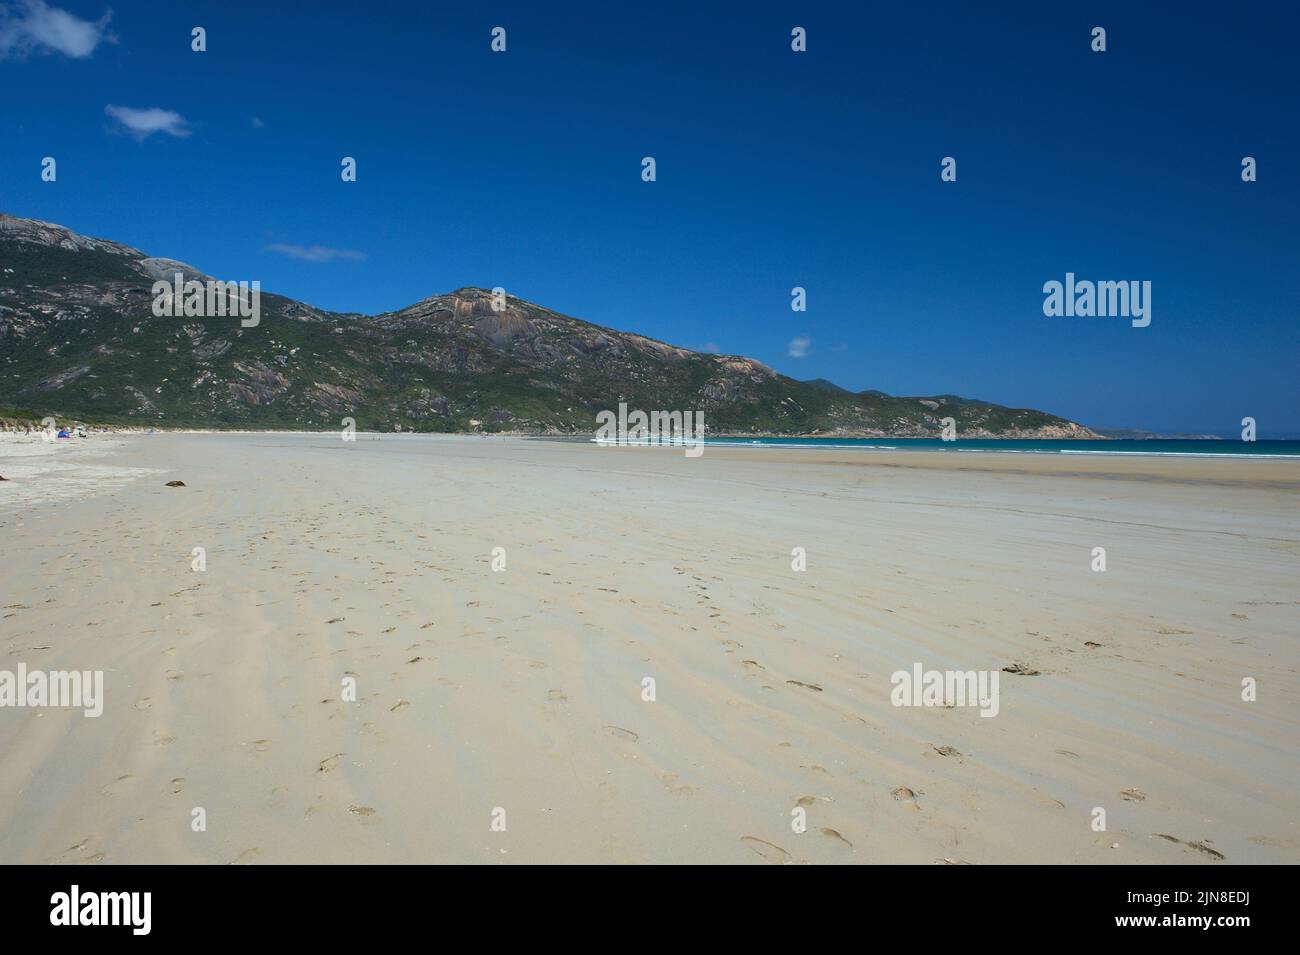 Norman Beach is at Tidal Inlet, at the Southern end of Wilsons Promontory National Park in Victoria, Australia. It's not usually this empty! Stock Photo